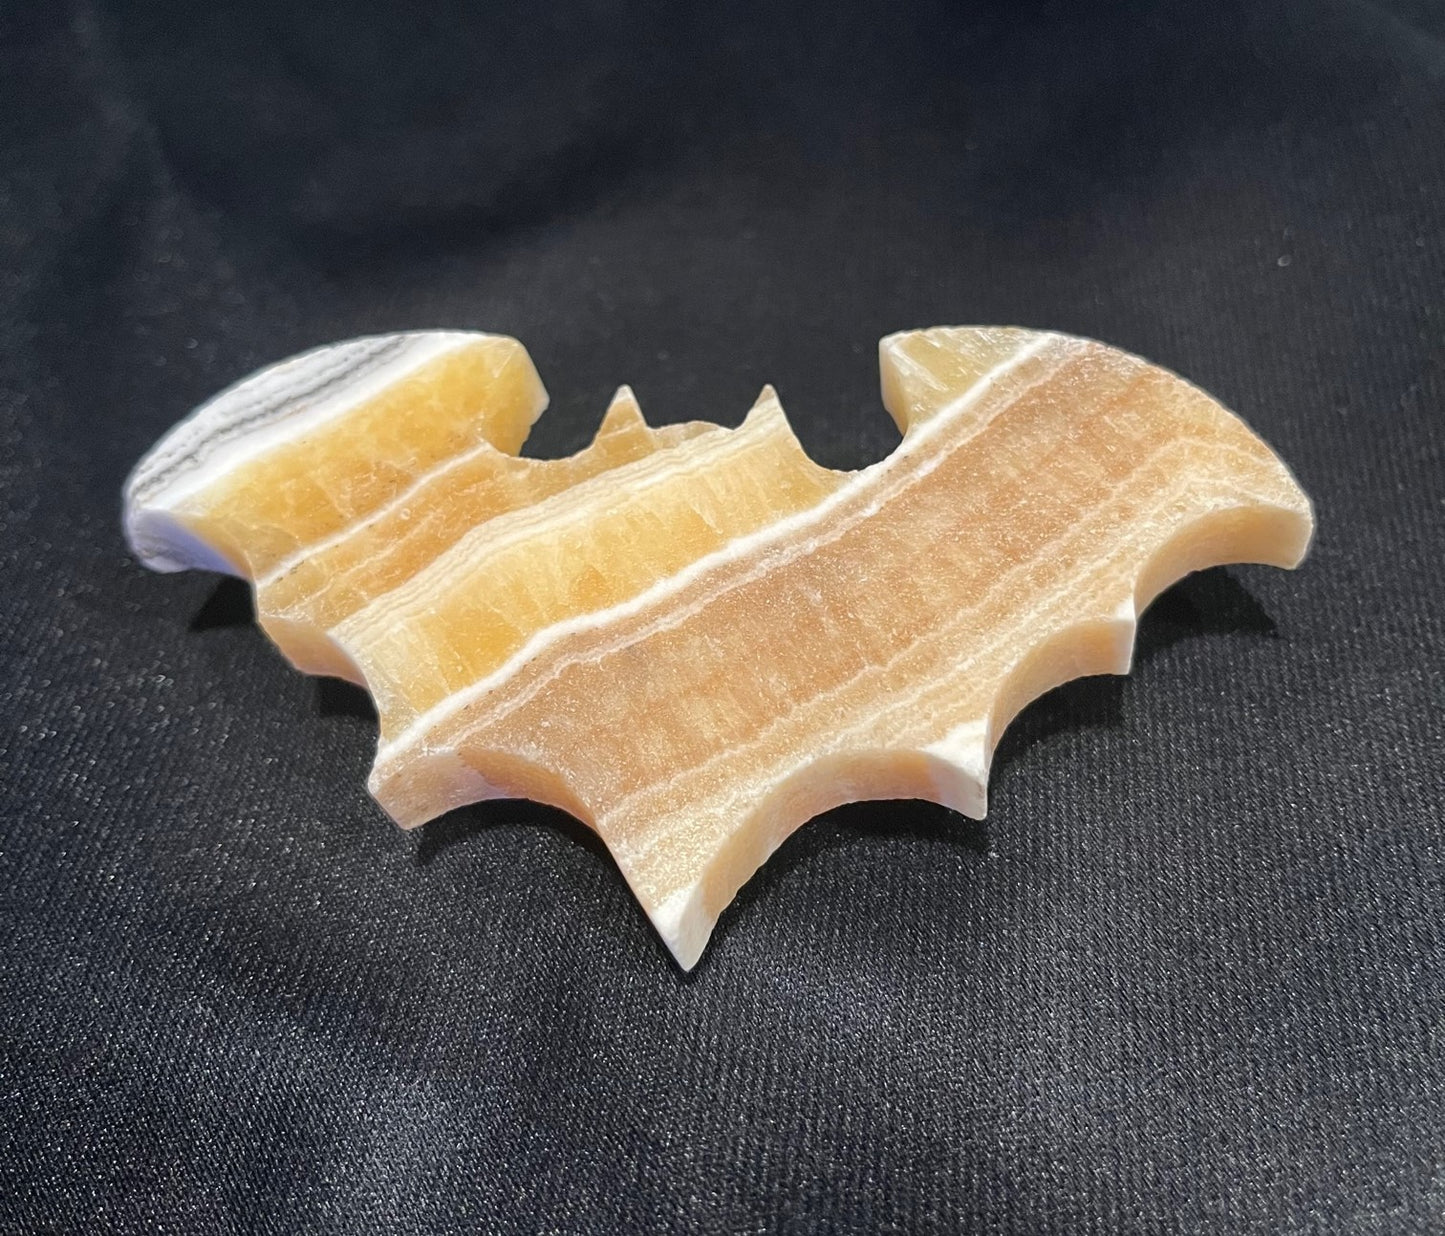 Vampire Bat crystal/stone carving-assorted